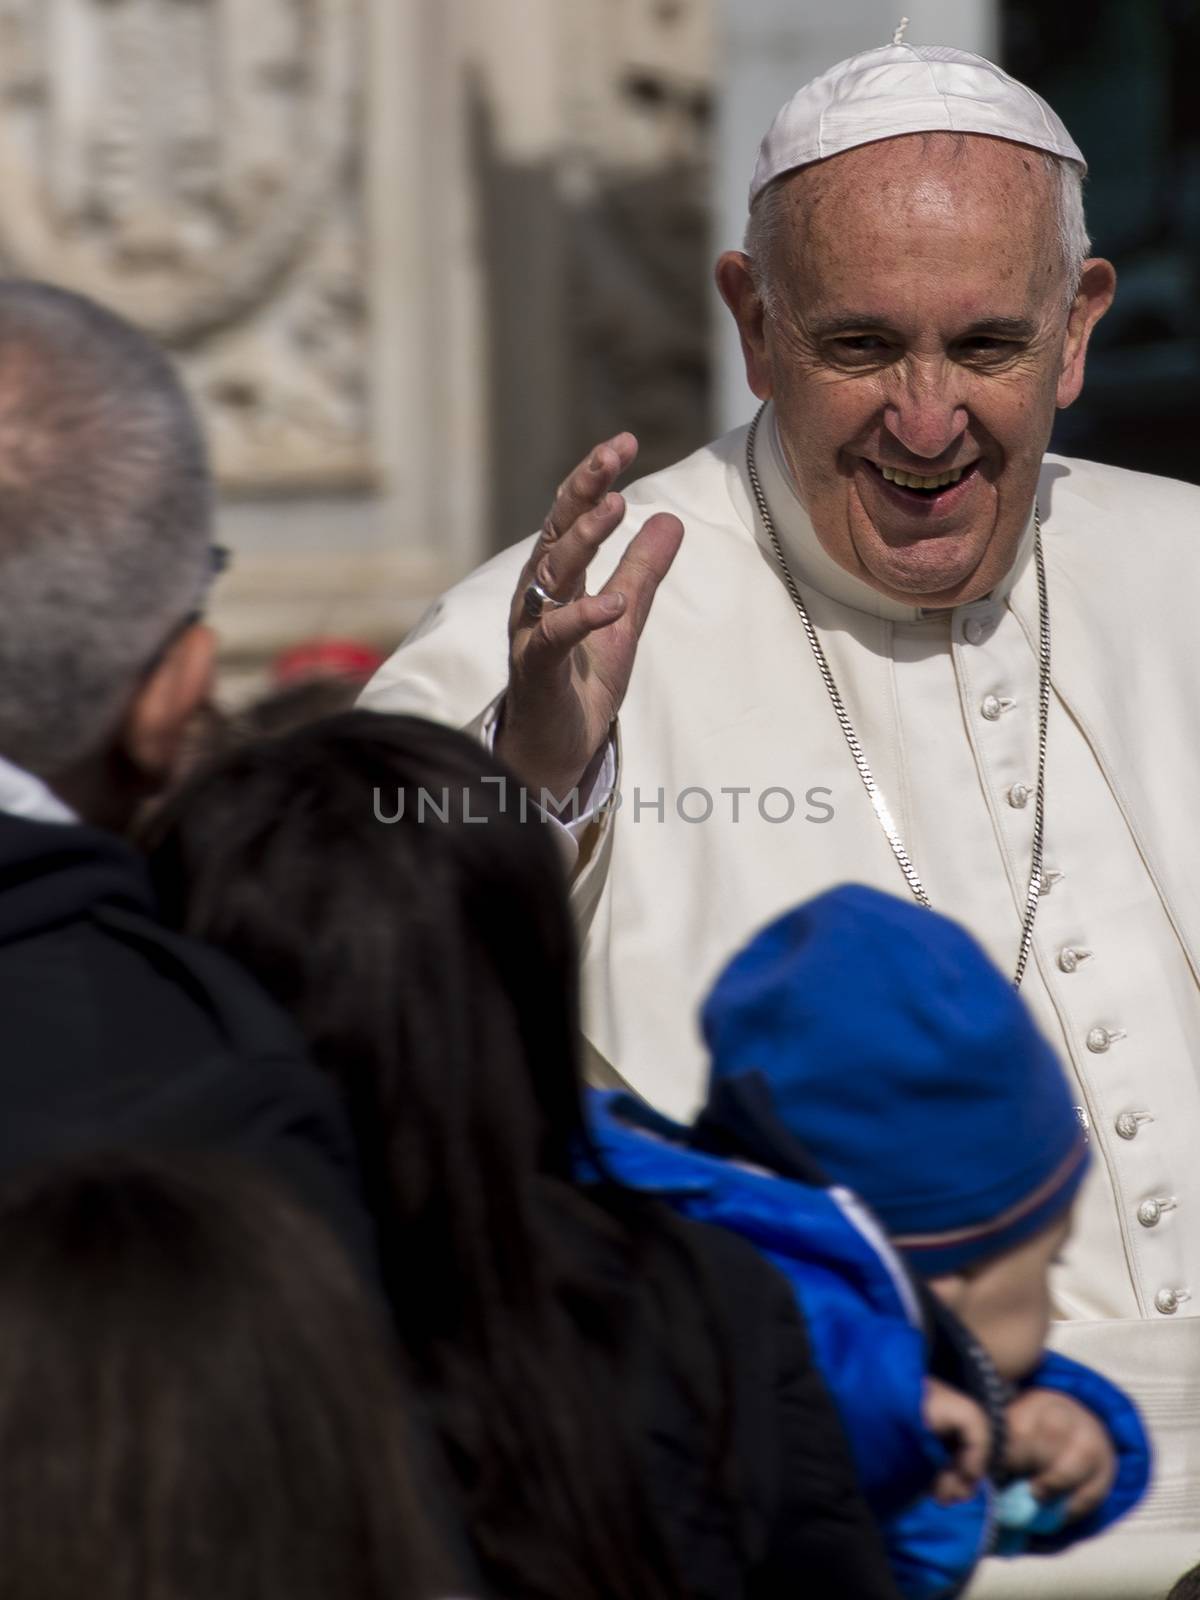 Vatican, Vatican city: Pope Francis waves at pilgrims as he held a Jubilee audience for 50 000 pilgrims on St.Peter's Square in Vatican on April 9, 2016 and spoke of mercy and its relationship with alms giving.